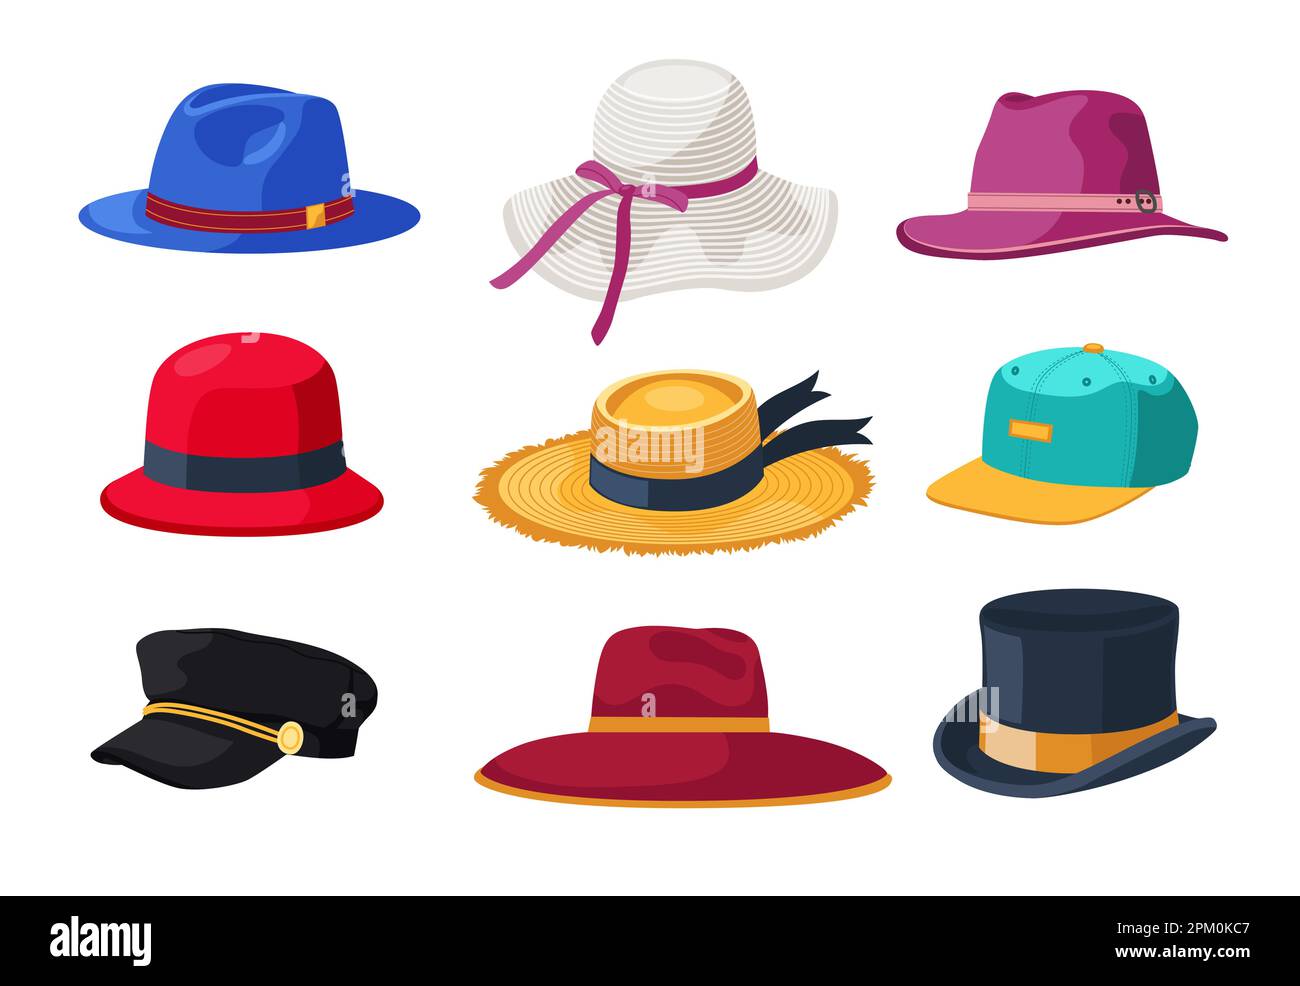 Cartoon hats Cut Out Stock Images & Pictures - Alamy